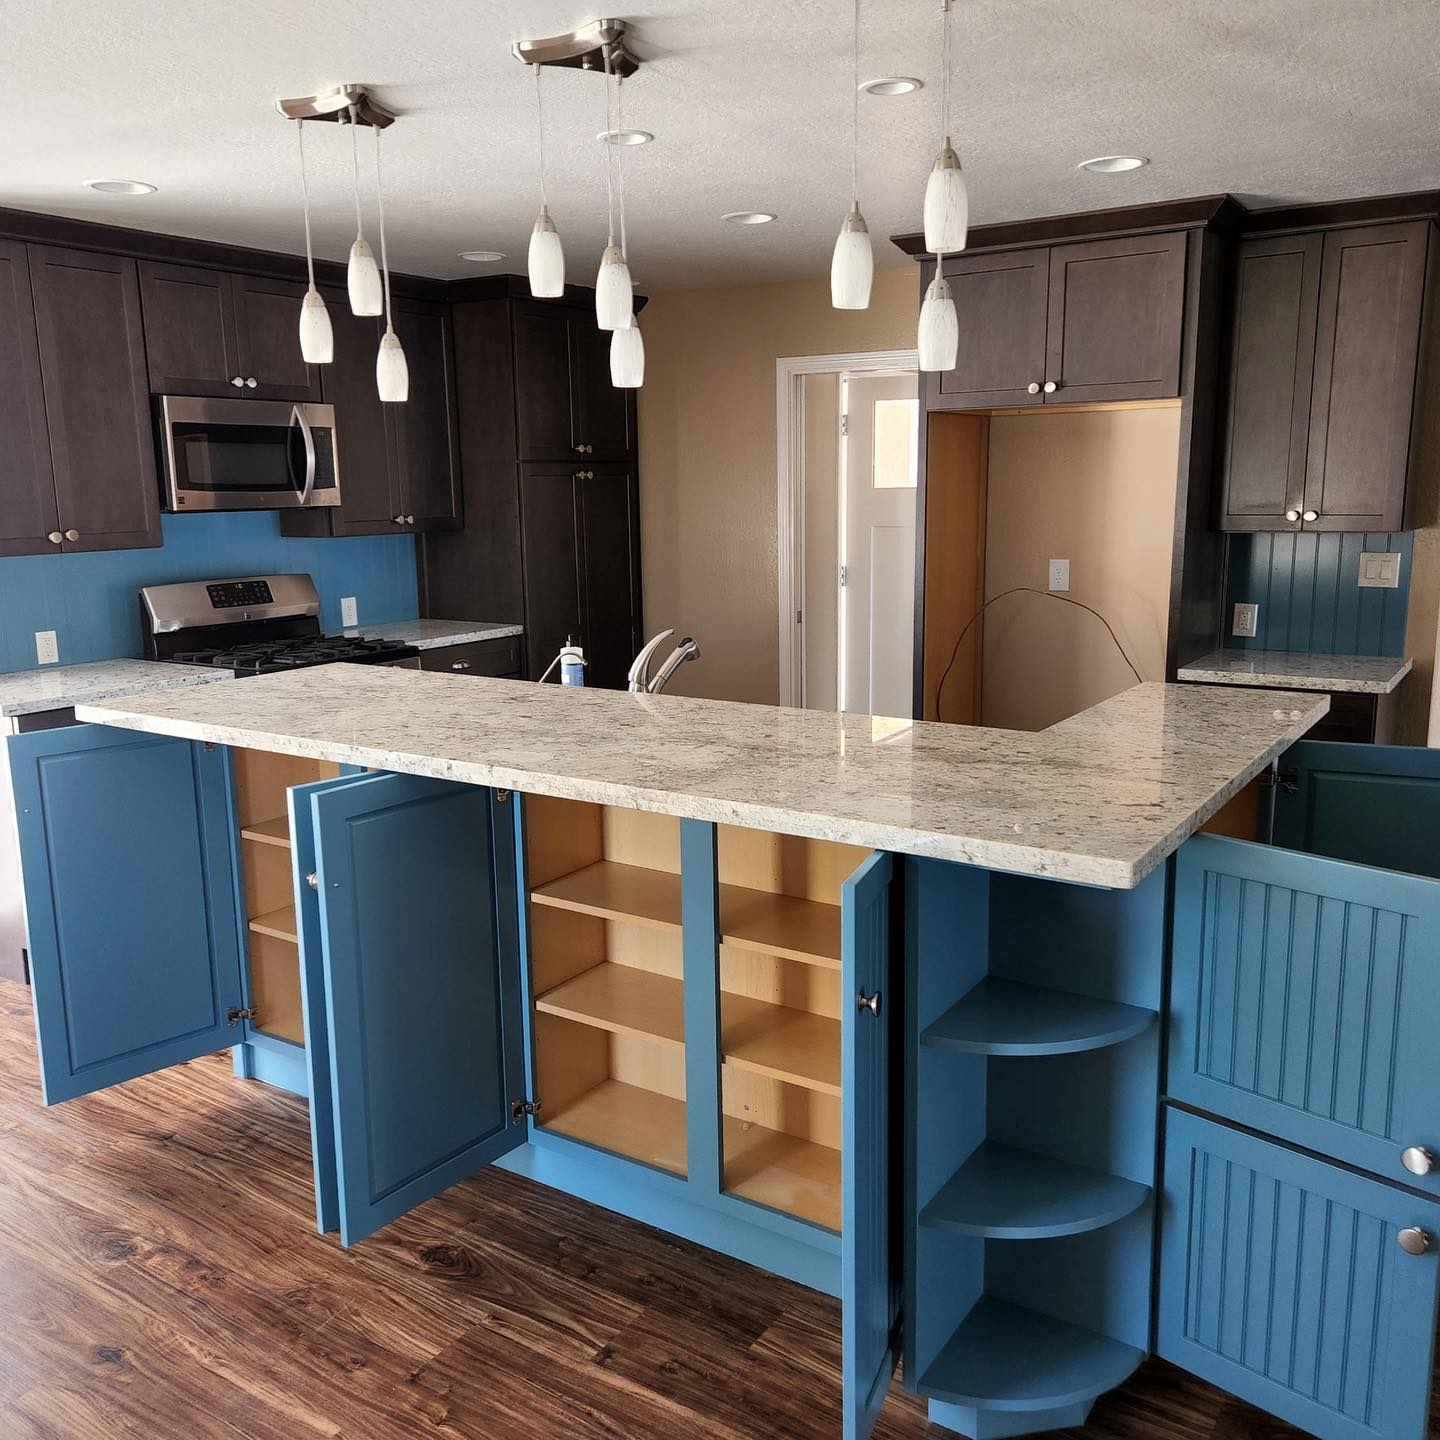 cabinets with classic walnut stain and modern blue island